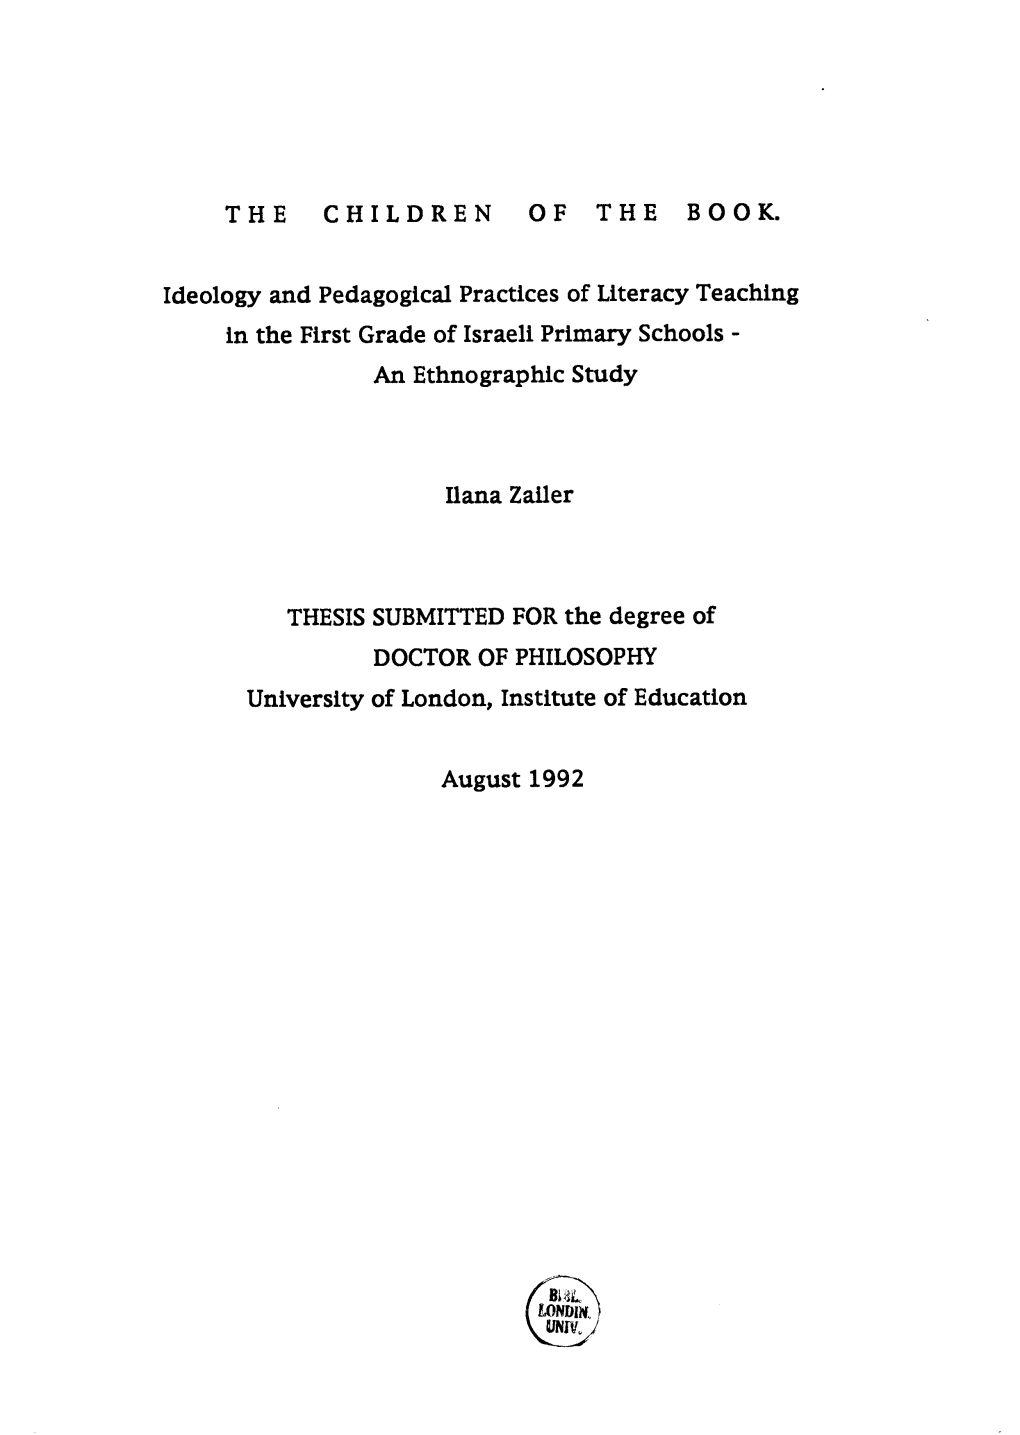 Ideology and Pedagogical Practices of Literacy Teaching in the First Grade of Israeli Primary Schools - an Ethnographic Study